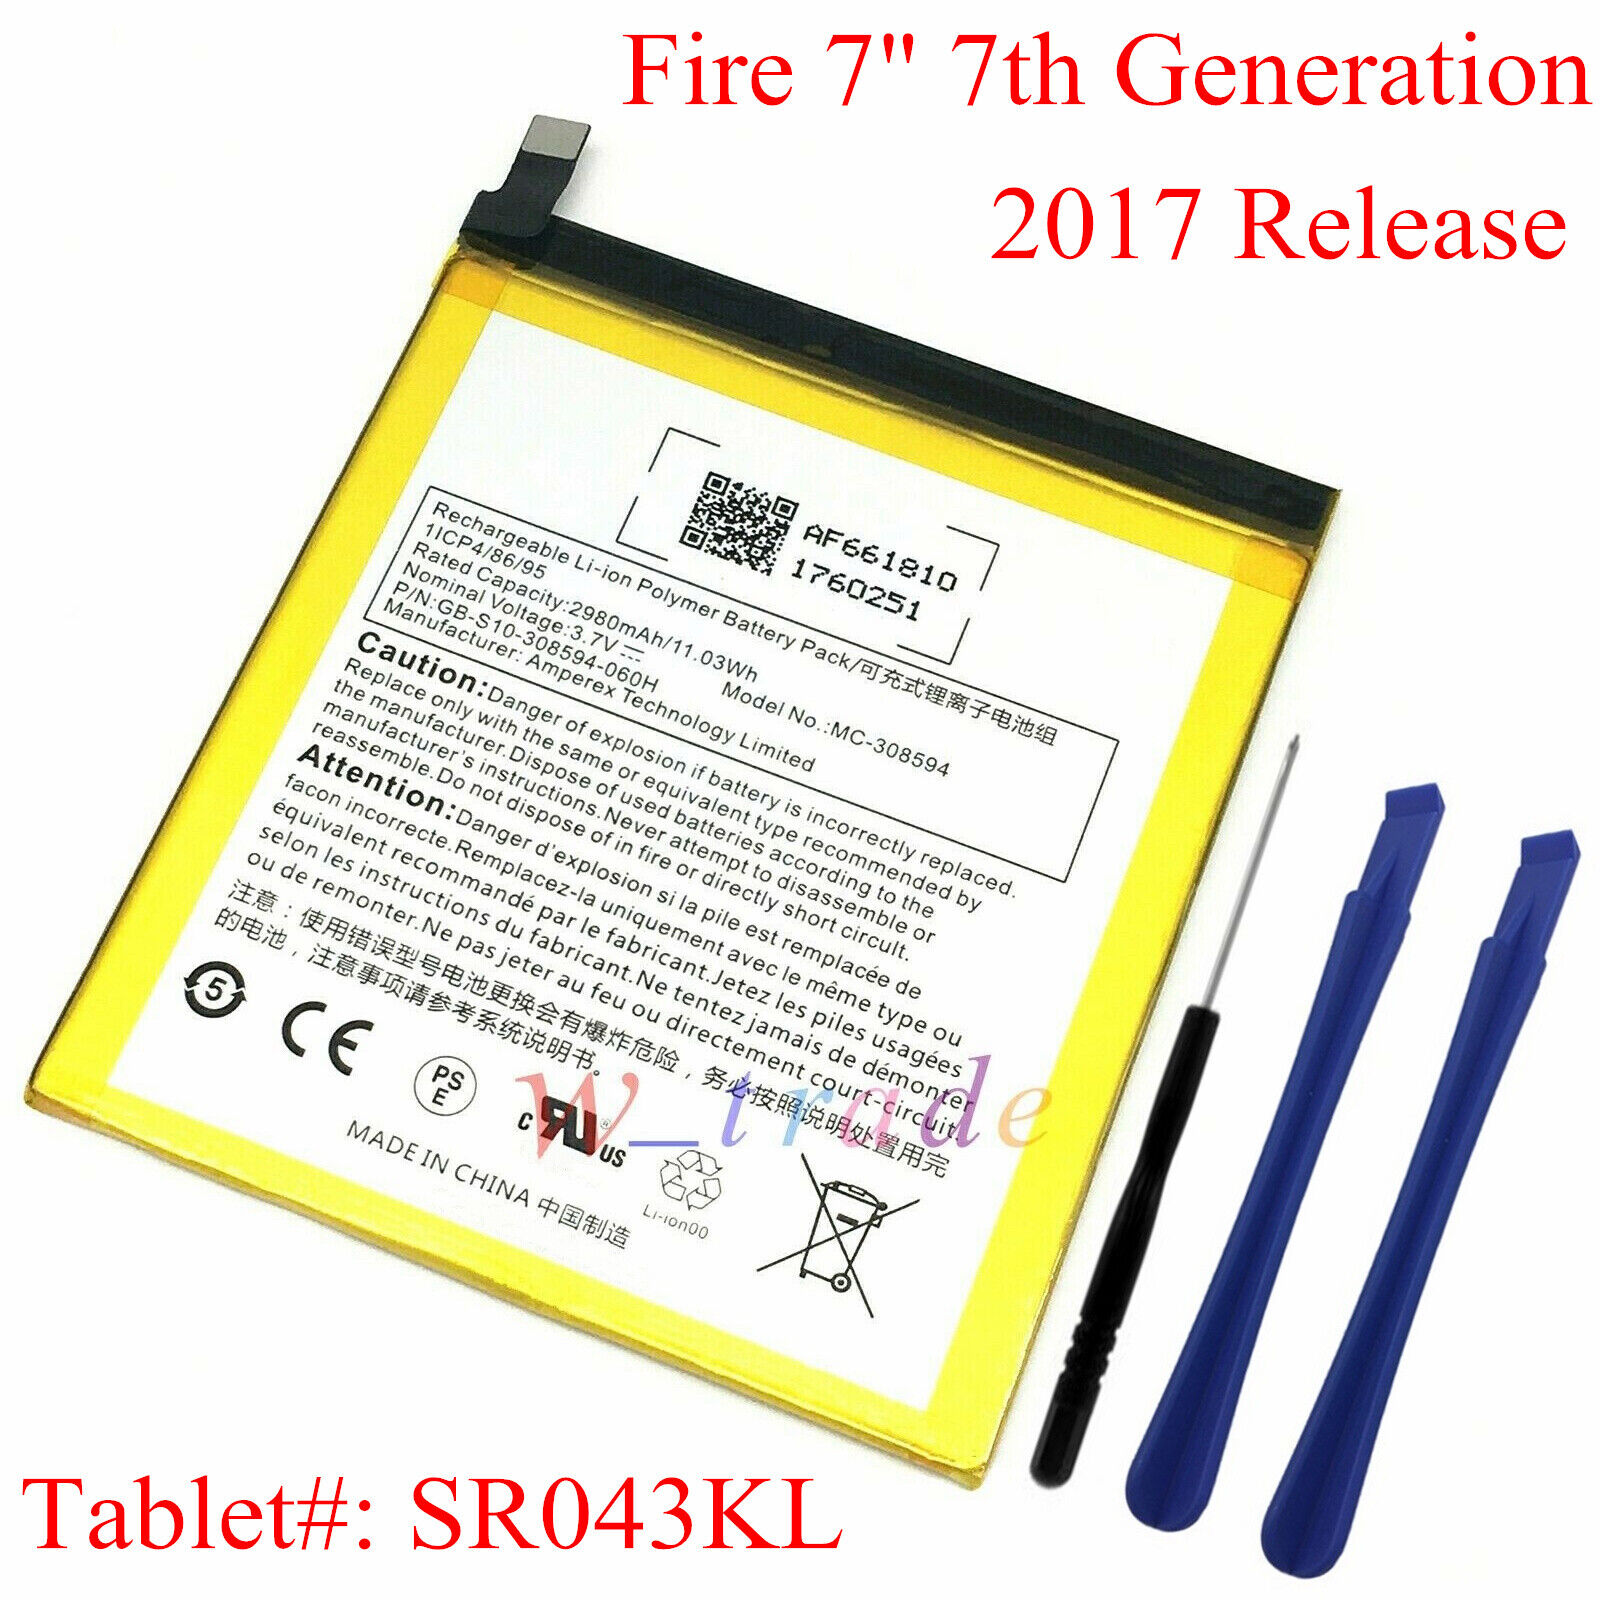 New Battery ST18 For Amazon Fire 7 7th Generation Tablet SR043KL (2017 Release)